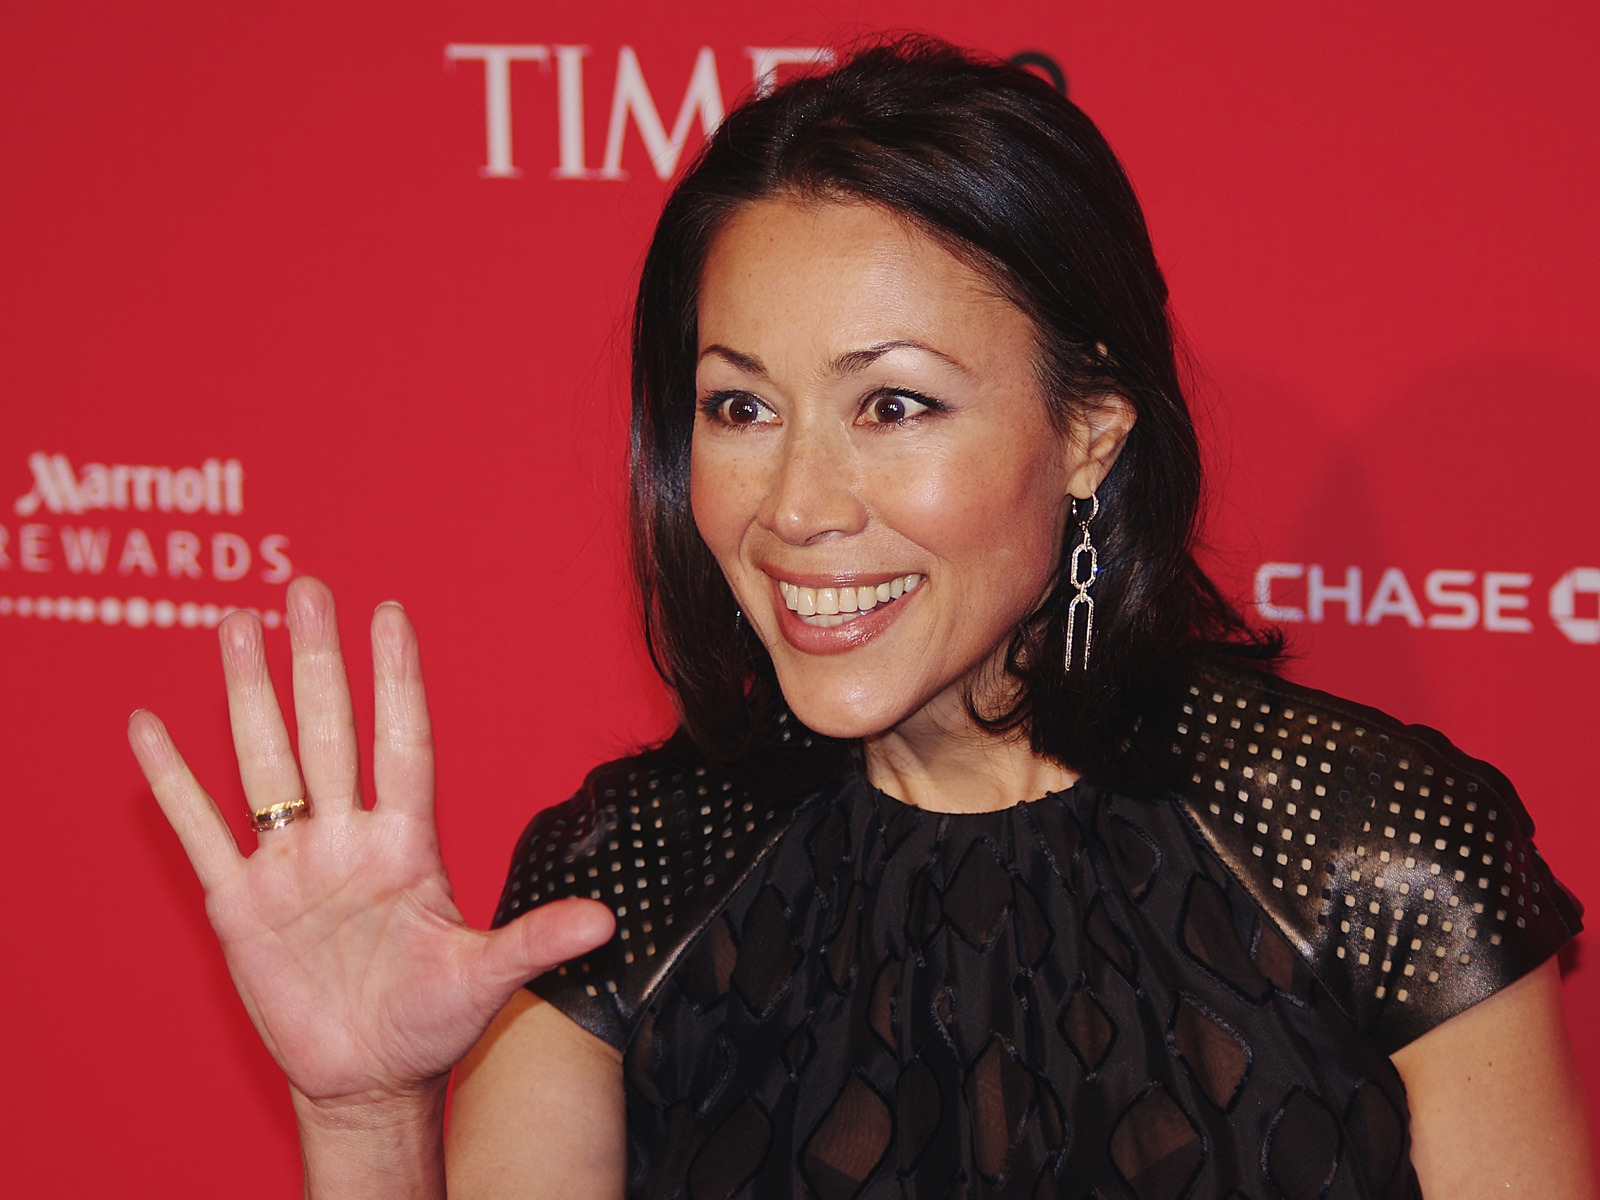 Ann Curry Look for 1600 x 1200 resolution